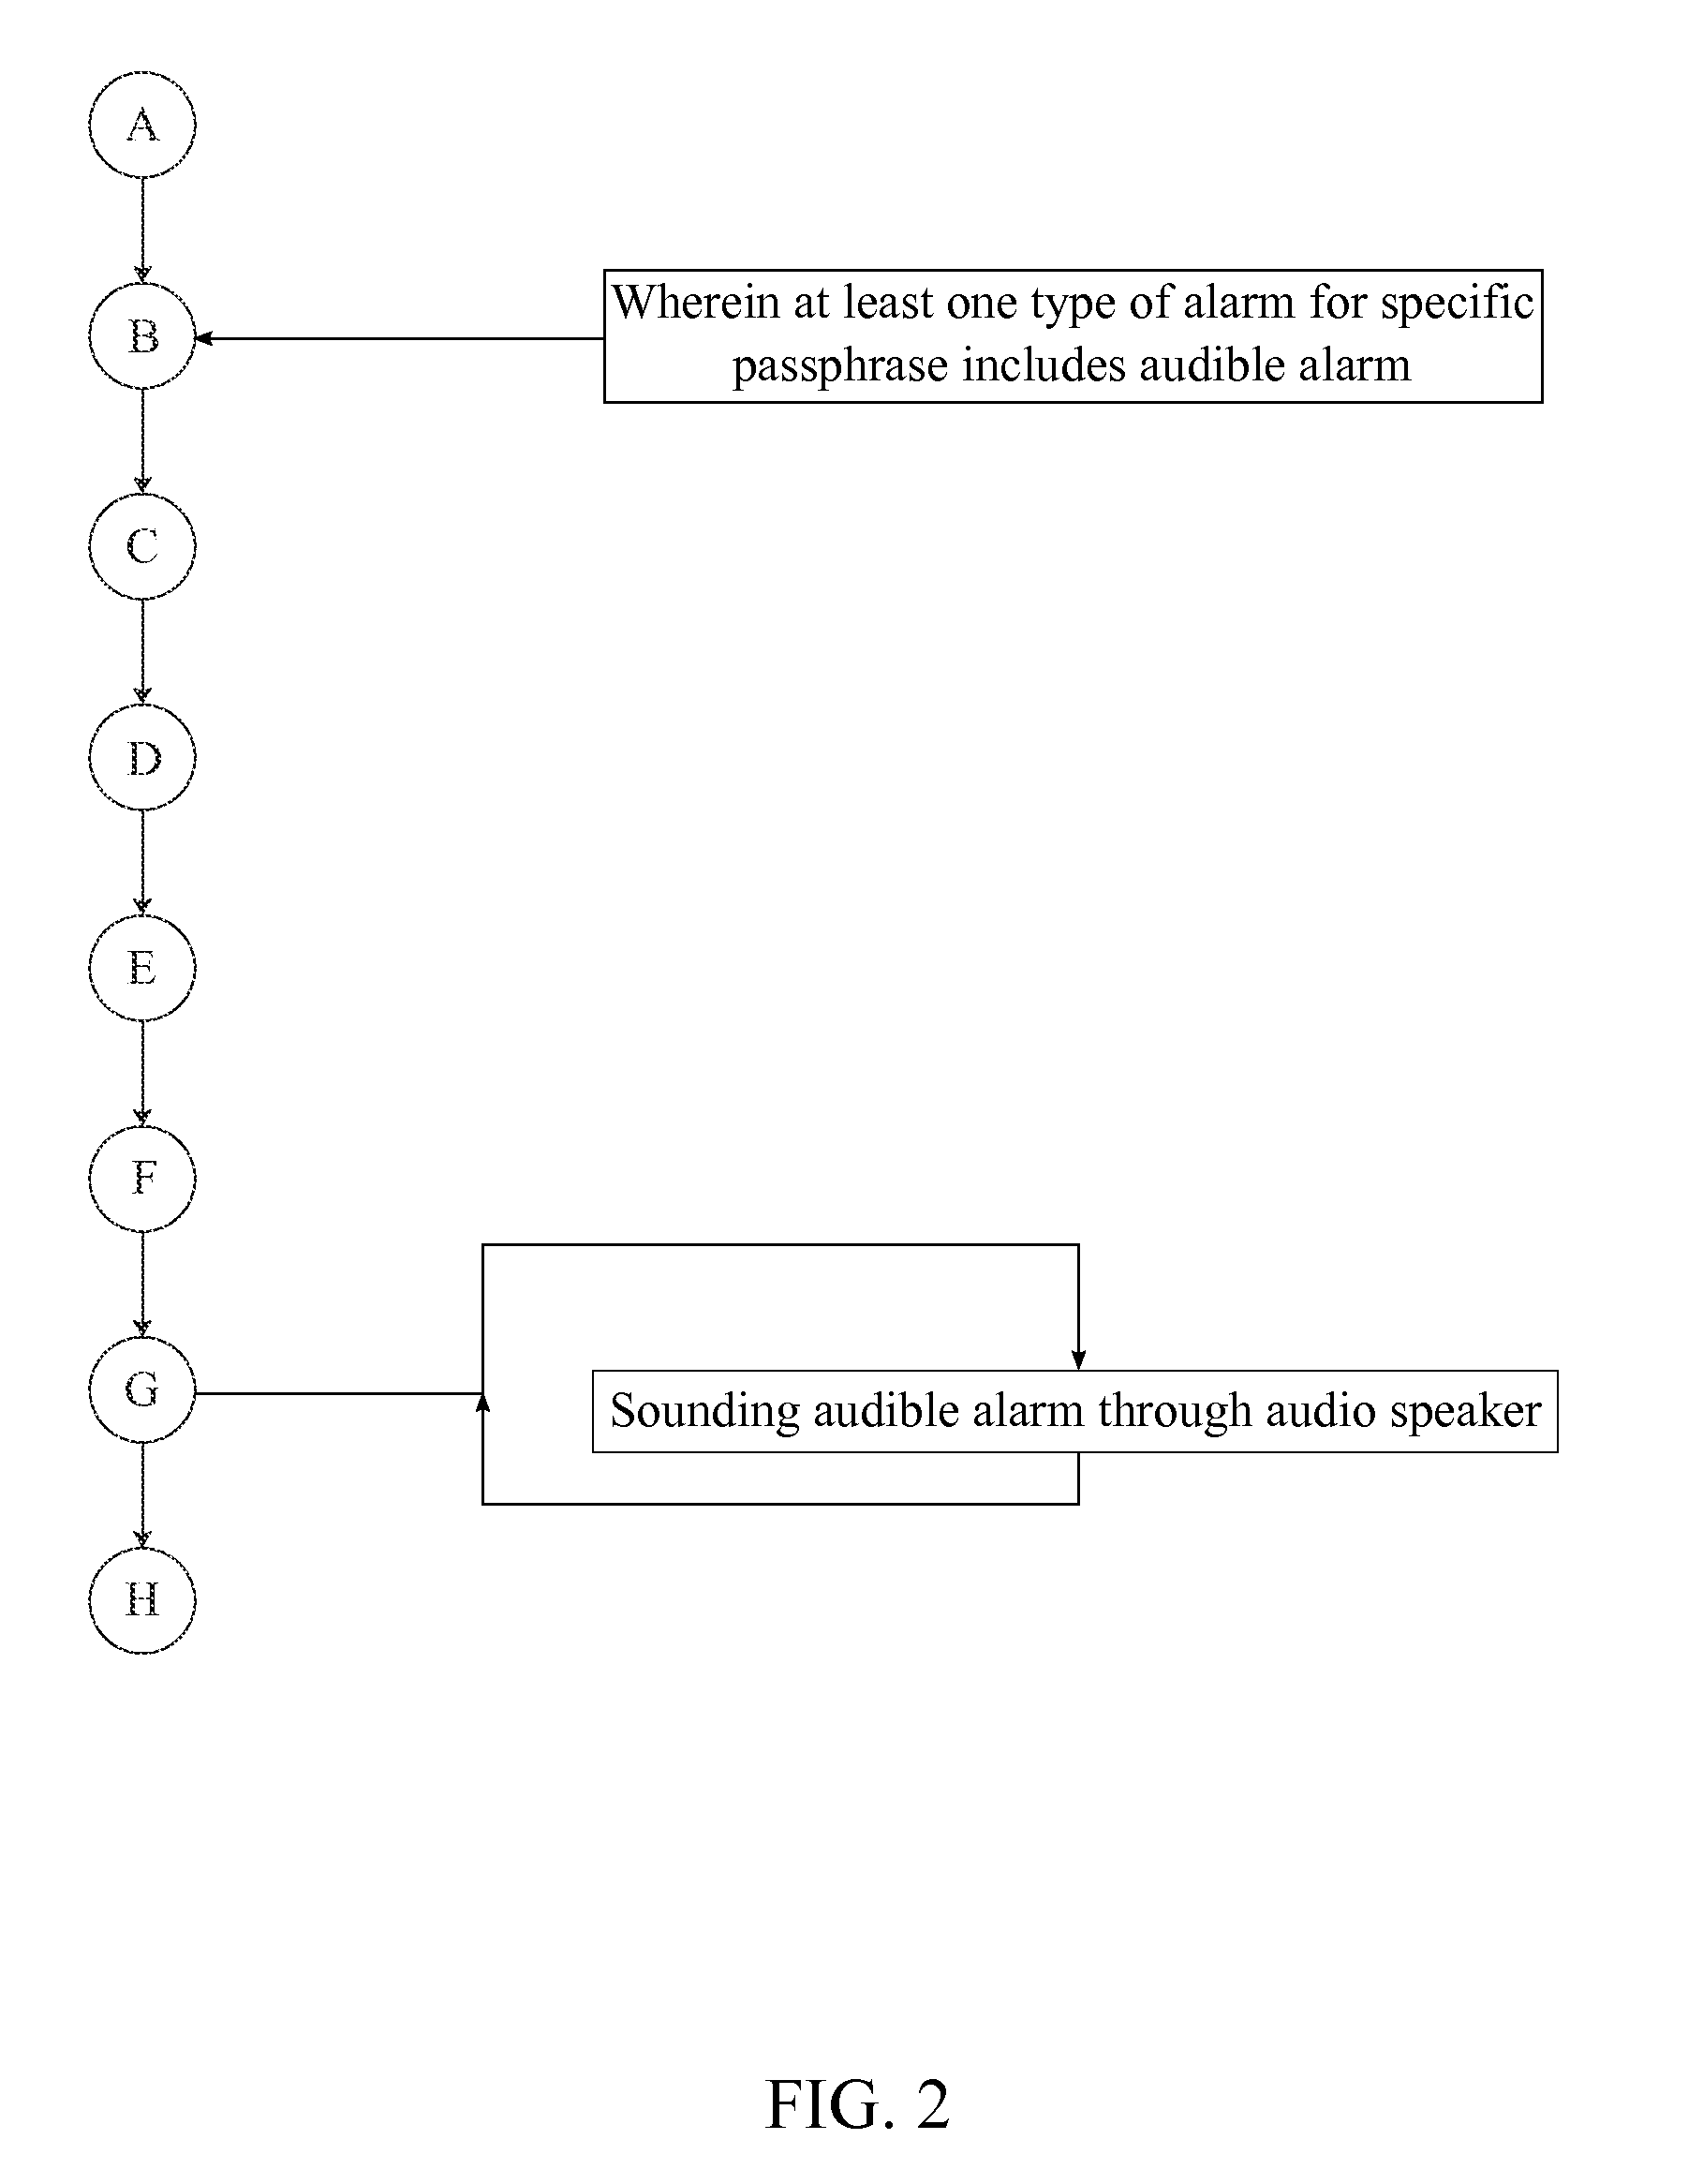 Method for an Automated Distress Alert System with Speech Recognition